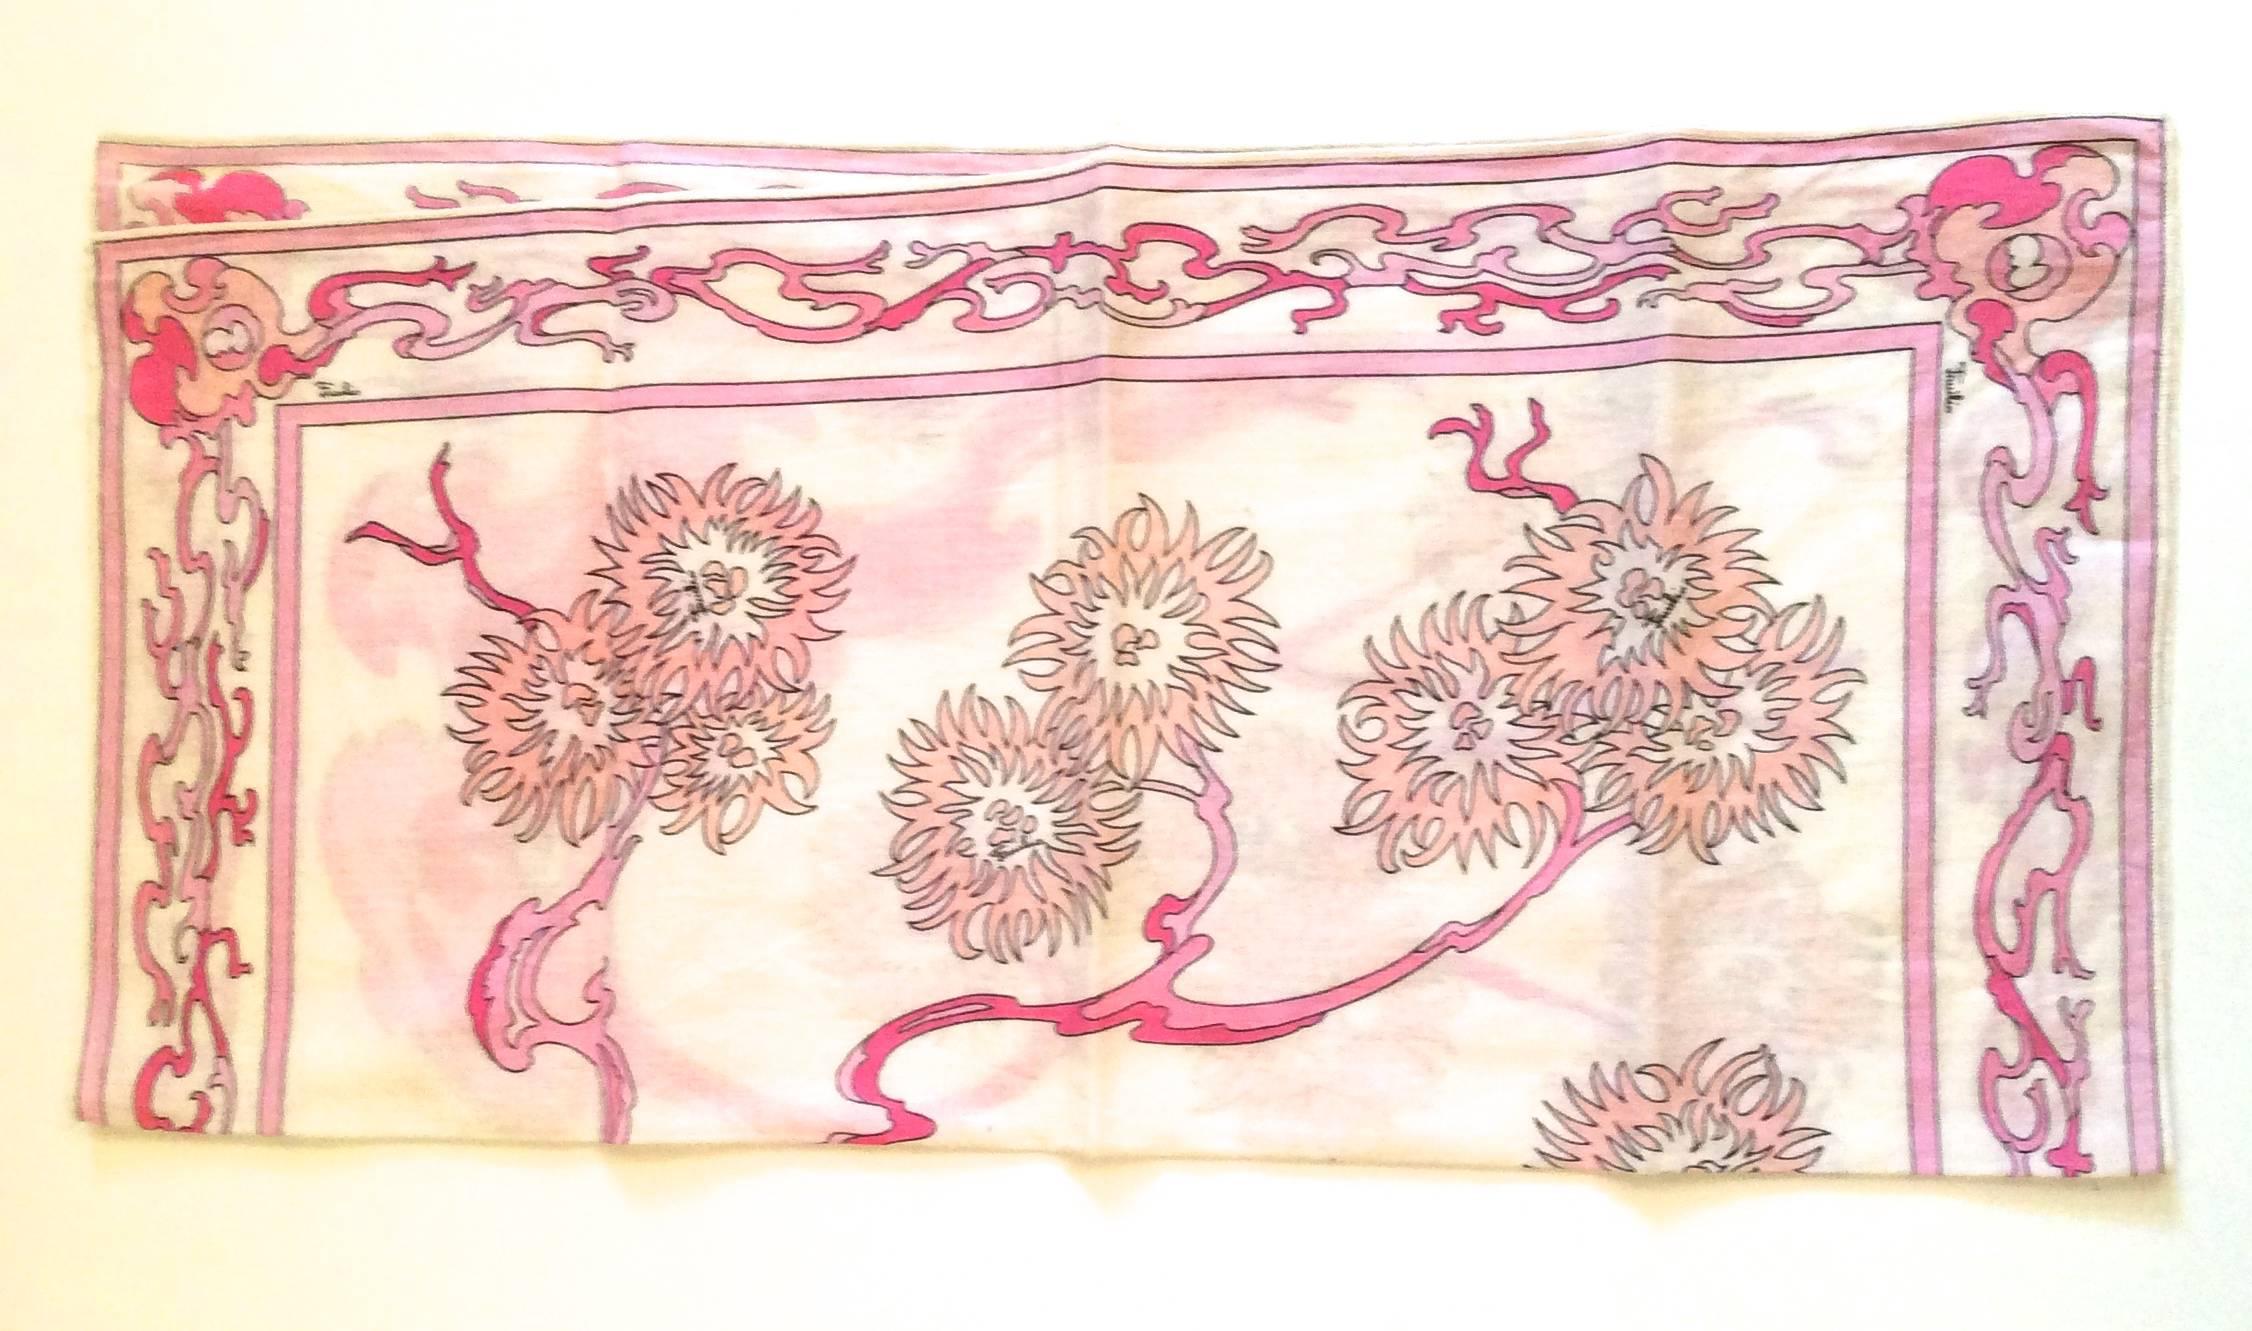 Presented here is a beautiful vintage 1960's scarf from the Emilio Pucci fashion house. The scarf is a white scarf with varying shades of pink in a floral print. Pucci has long been a label associated with its unique and mystifying design prints and